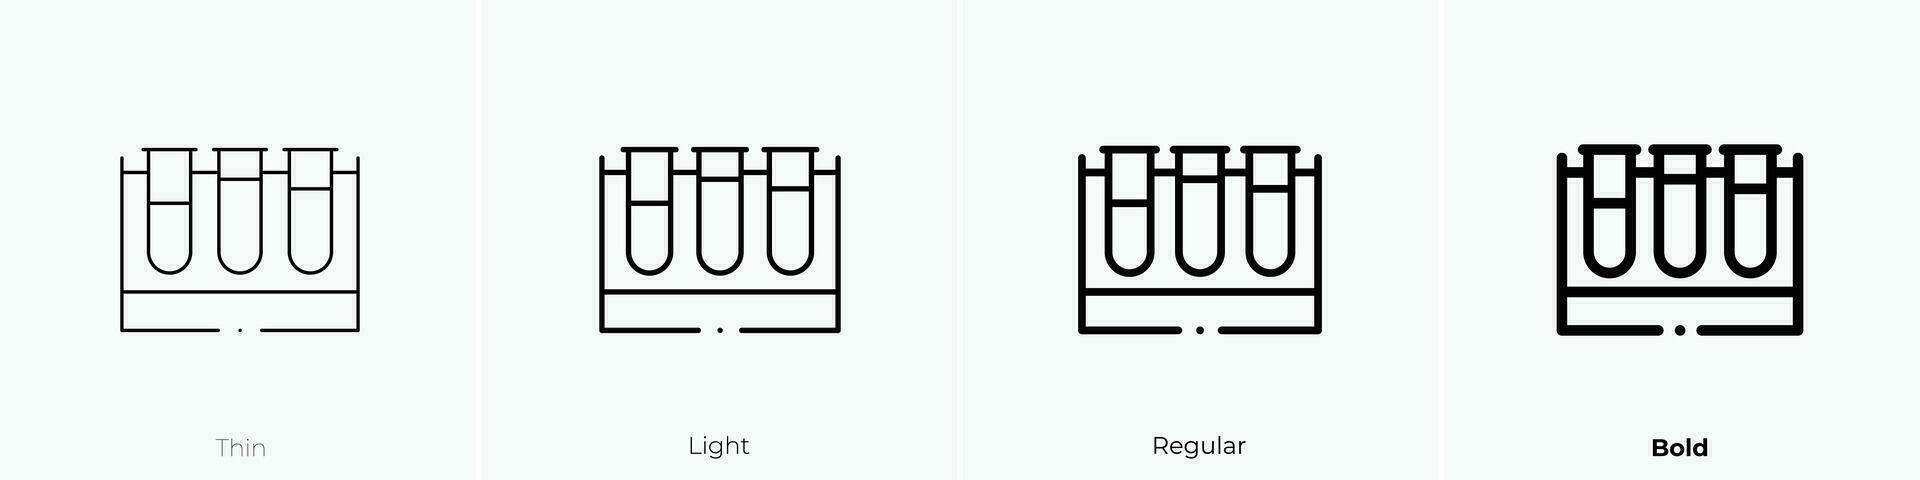 test tubes icon. Thin, Light, Regular And Bold style design isolated on white background vector